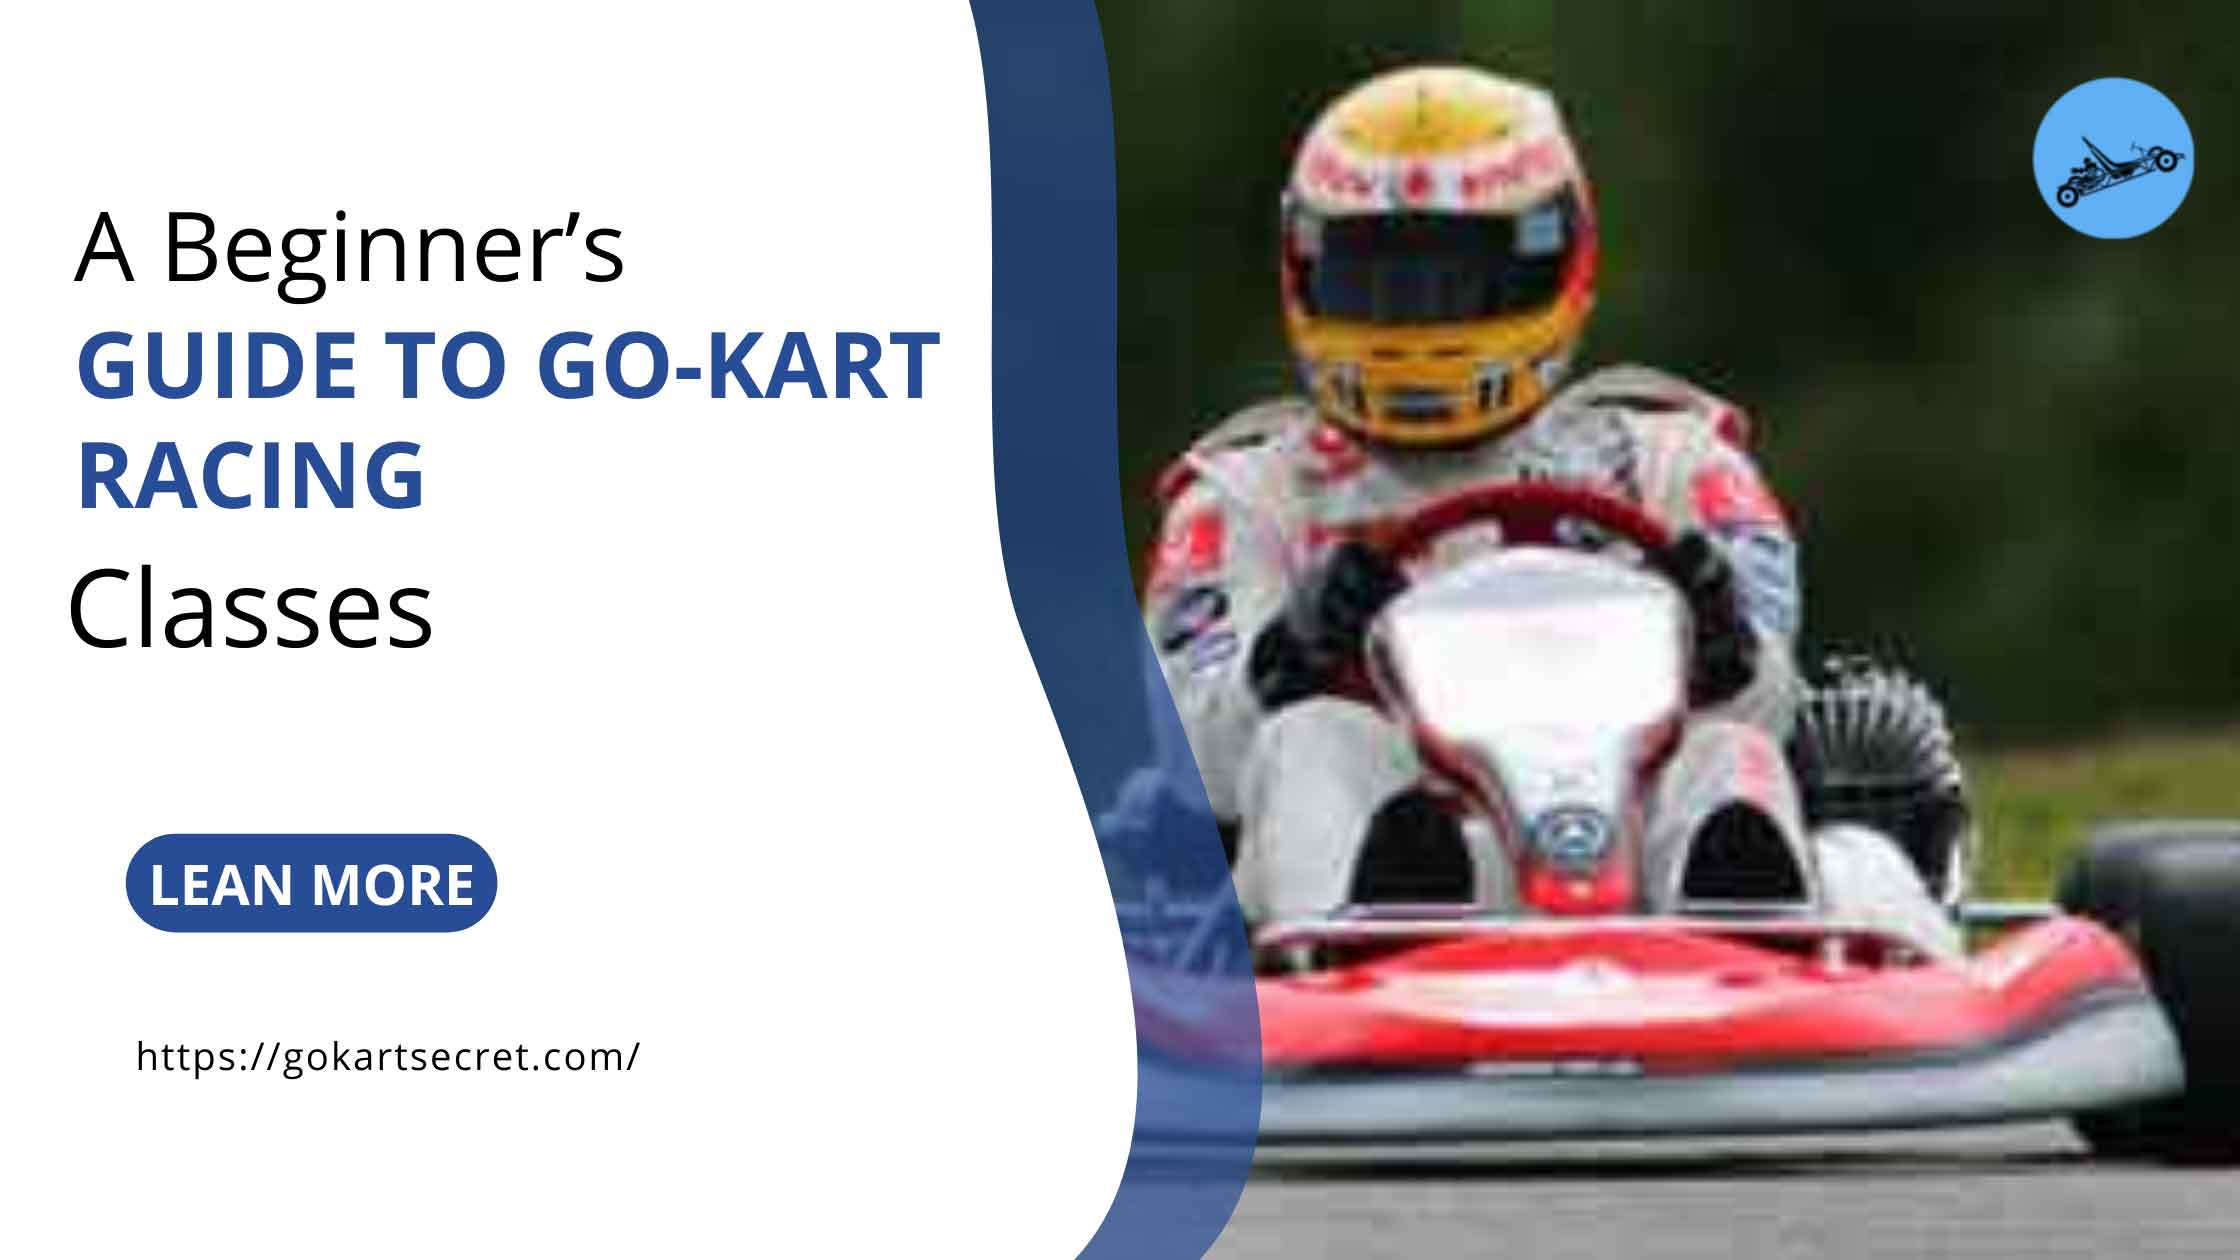 A Beginner’s Guide To Go-Kart Racing Classes